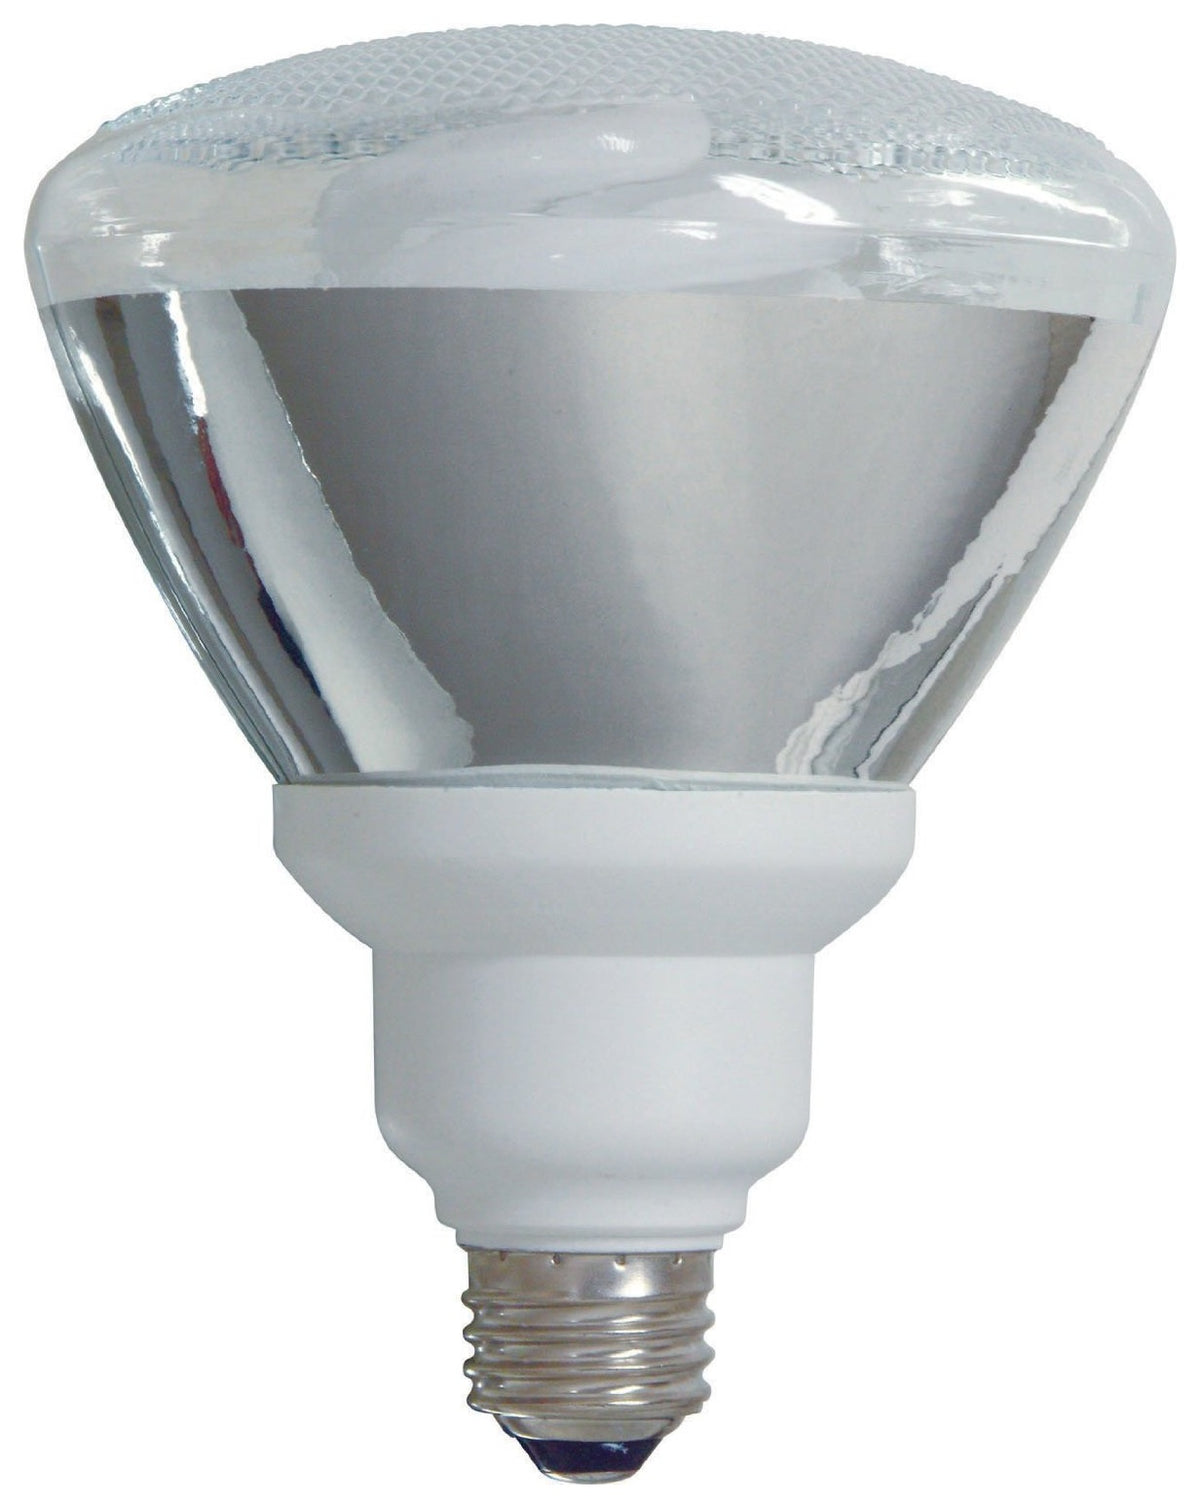 buy reflector light bulbs at cheap rate in bulk. wholesale & retail lighting & lamp parts store. home décor ideas, maintenance, repair replacement parts